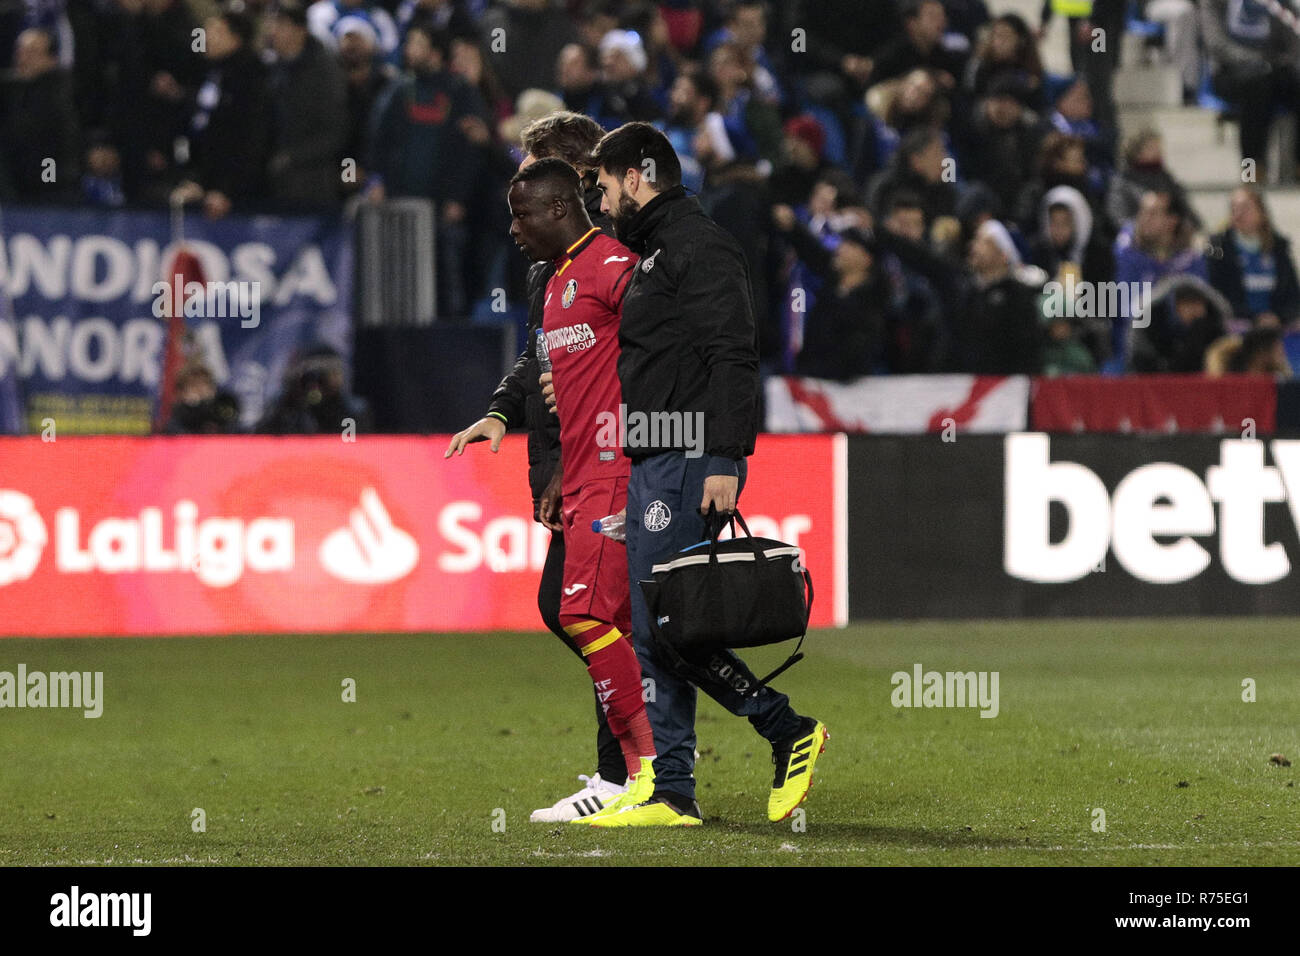 Leganes, Madrid, Spain. 7th Dec, 2018. Getafe CF's Amath Ndiaye seen injured during the La Liga match between CD Leganes and Getafe CF at Butarque Stadium in Leganes, Spain. Credit: Legan P. Mace/SOPA Images/ZUMA Wire/Alamy Live News Stock Photo